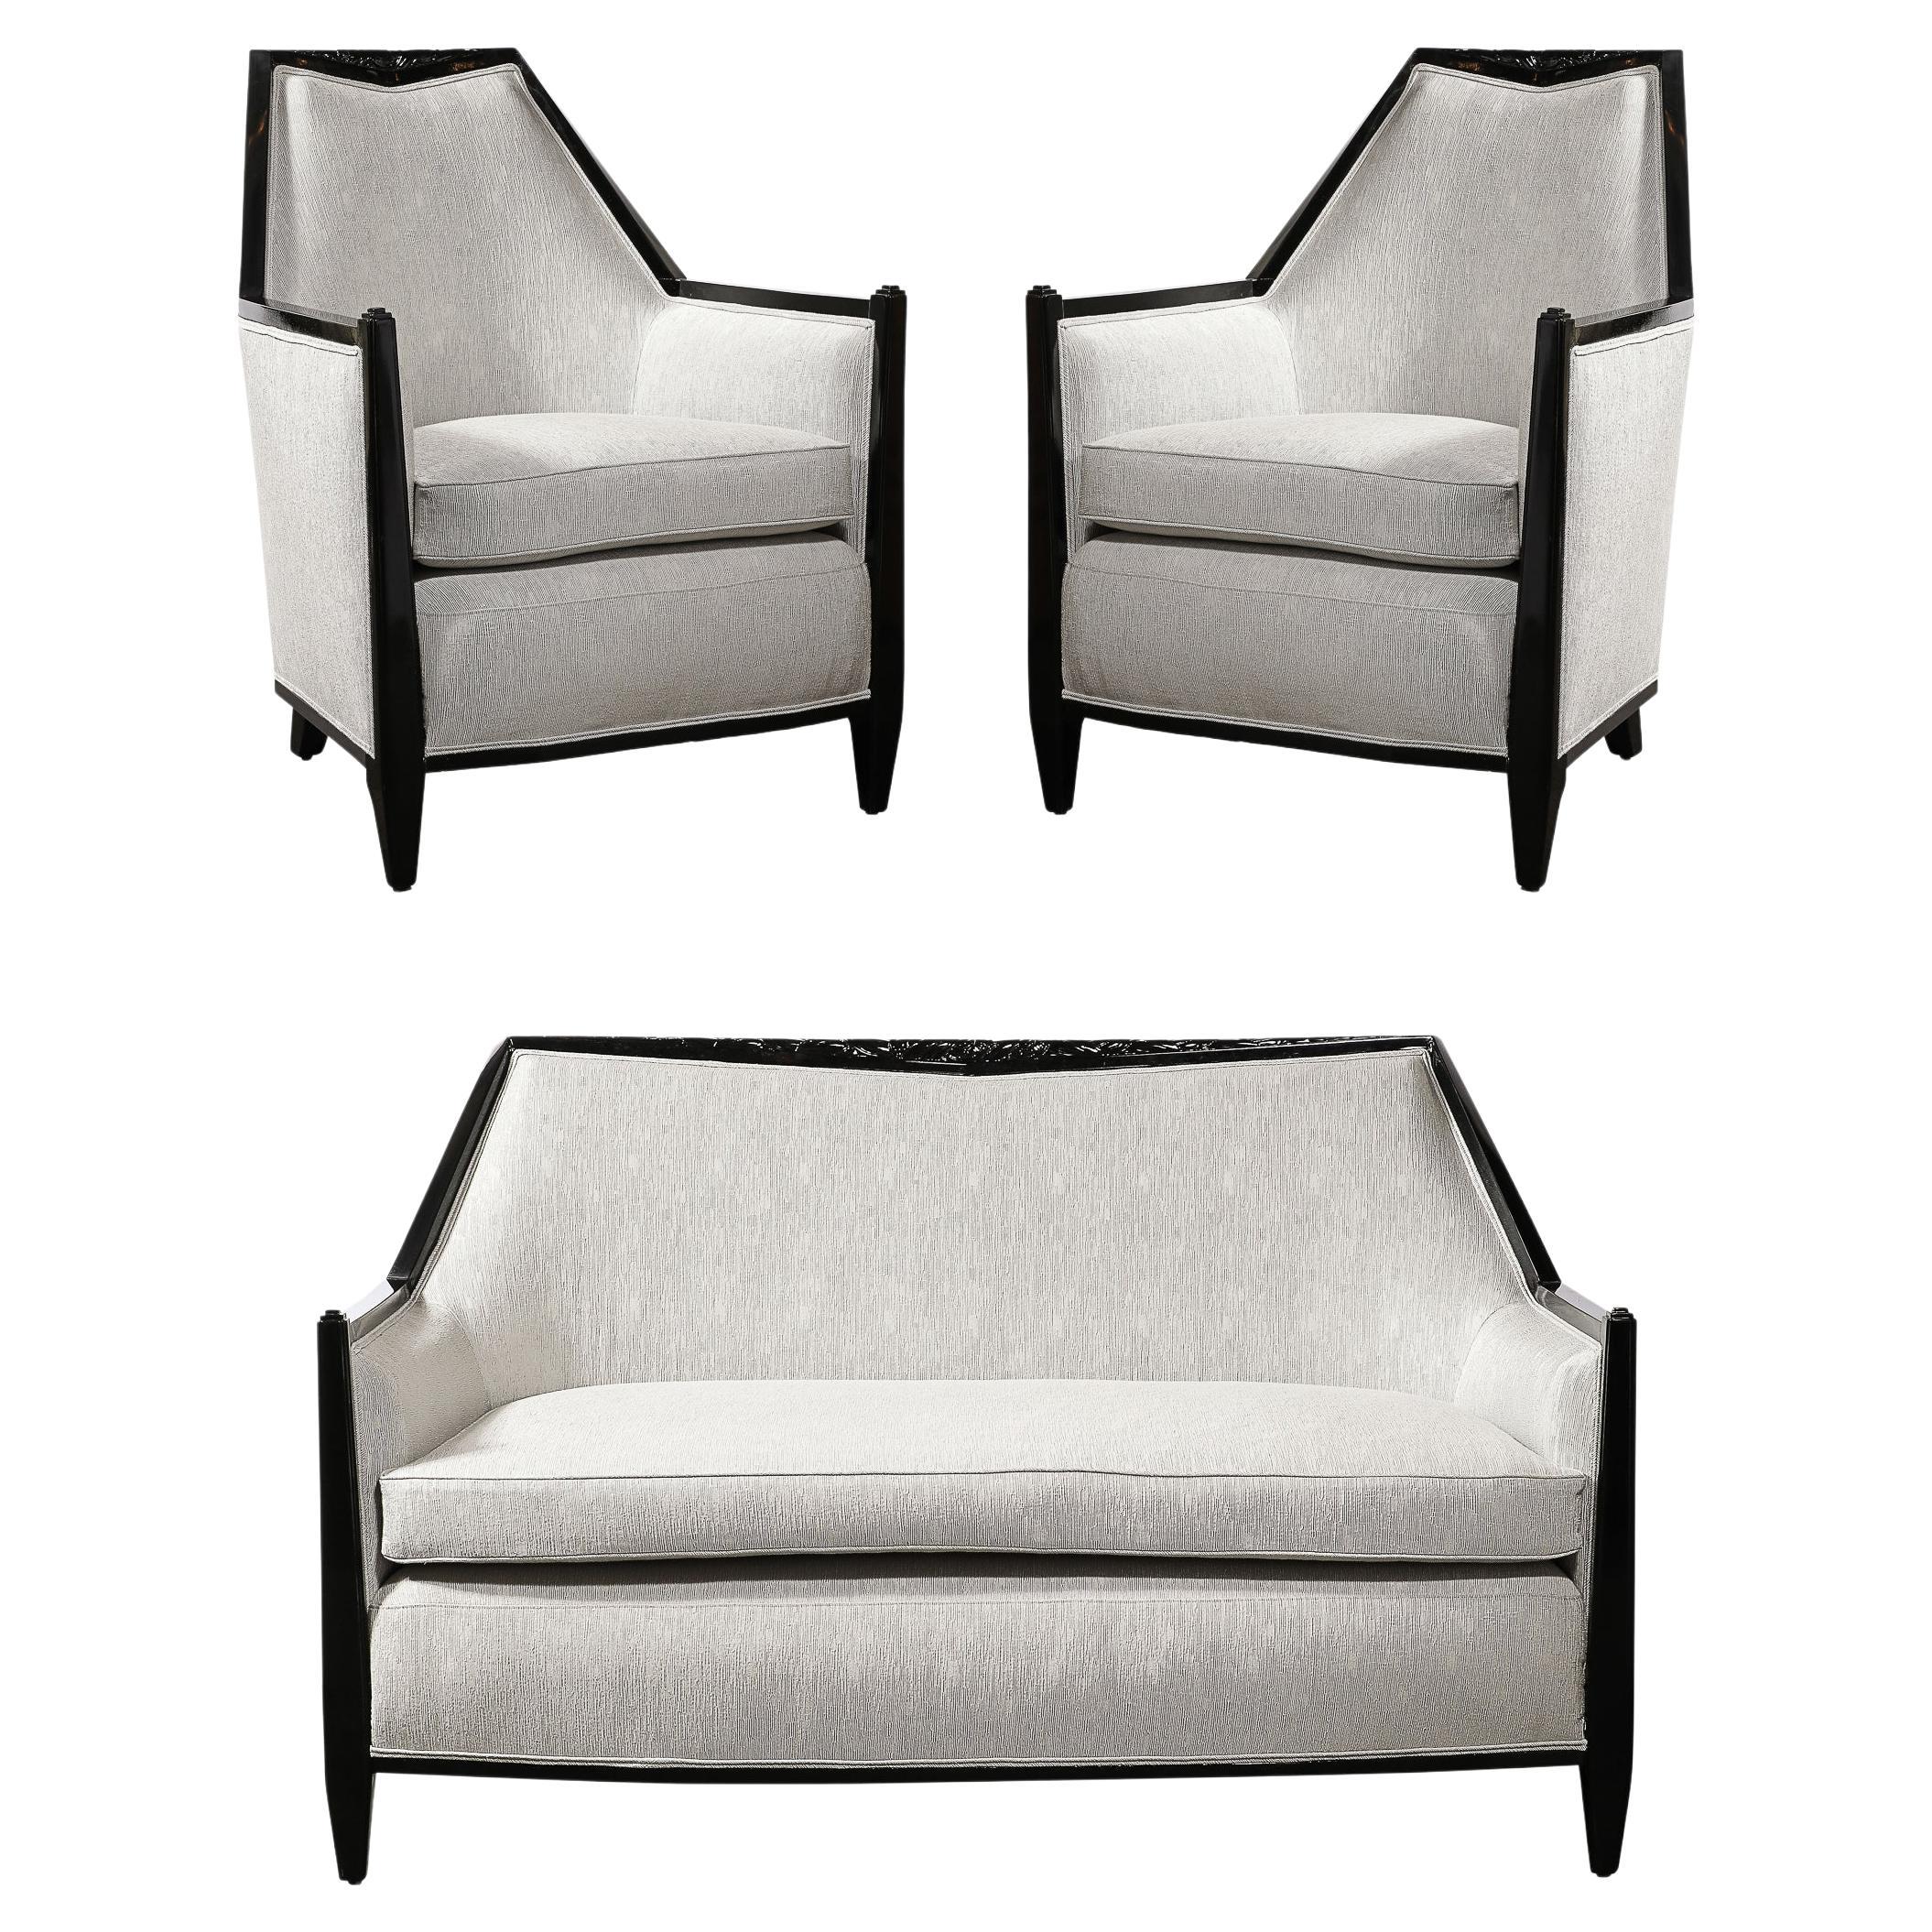 Art Deco Cubist Skyscraper Style Settee & Lounge Chair Set in Manner of Ruhlmann For Sale